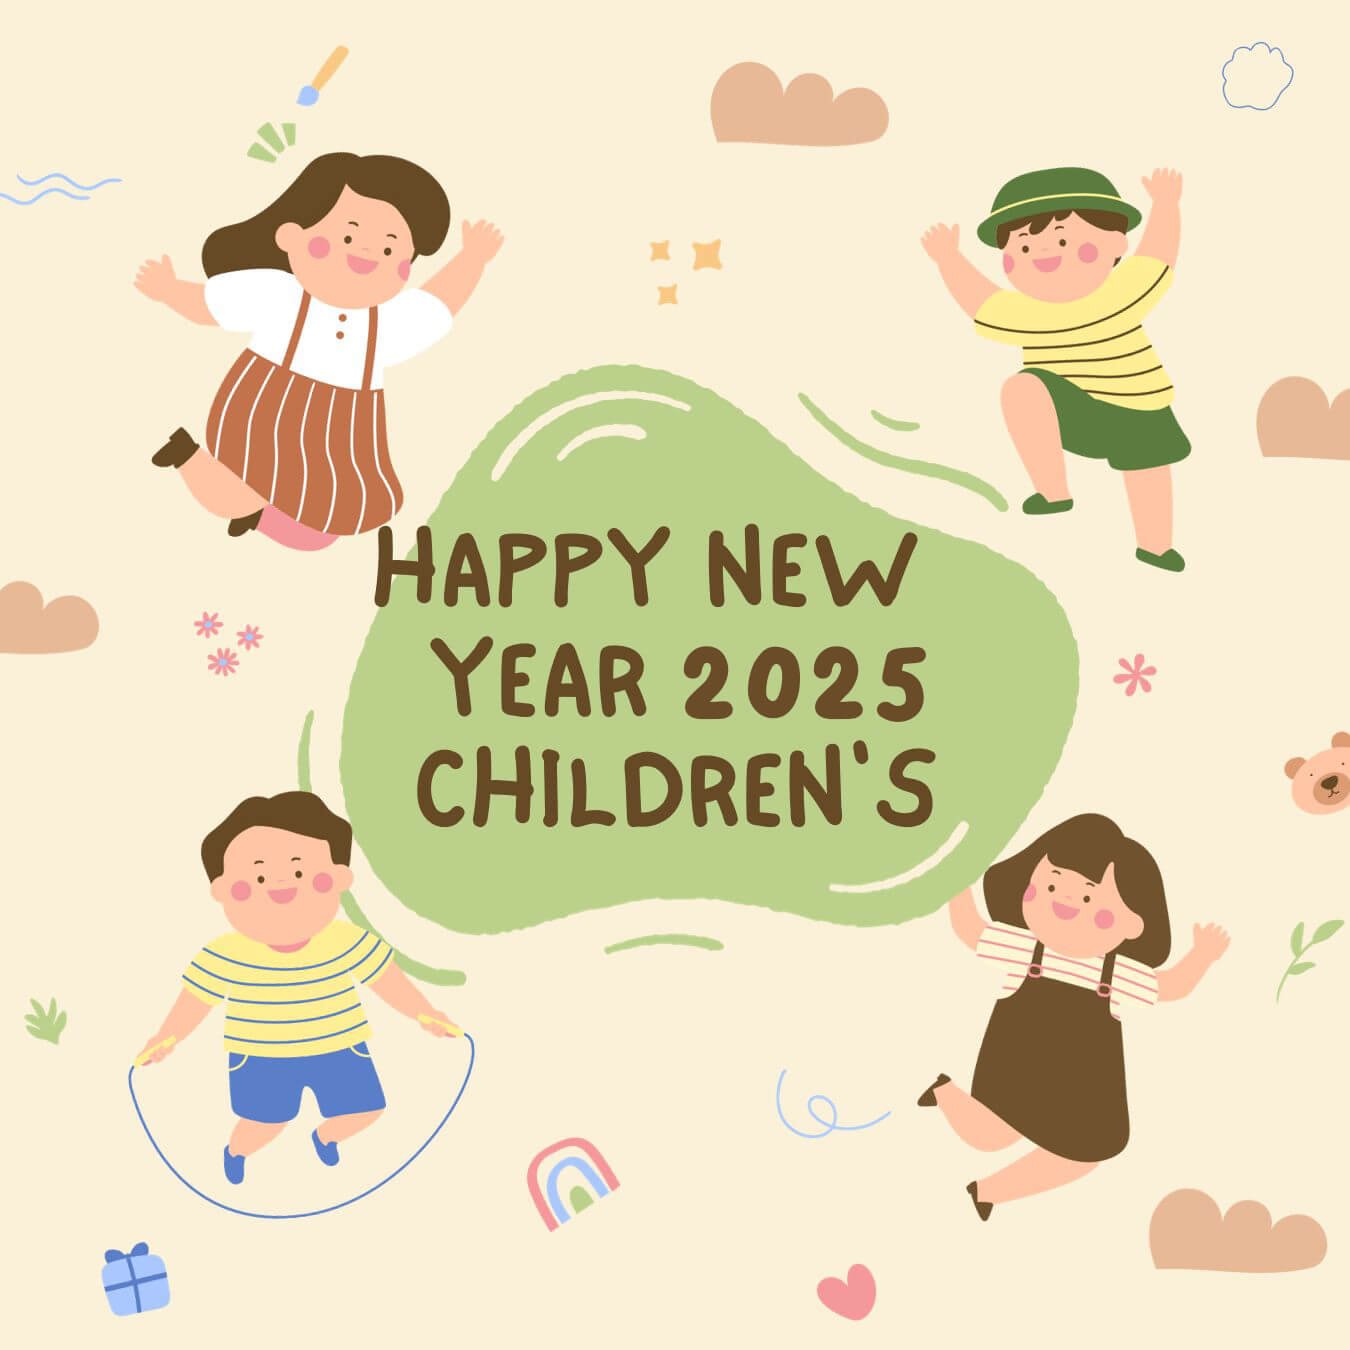 Happy New Year Wishes For Children's 2025